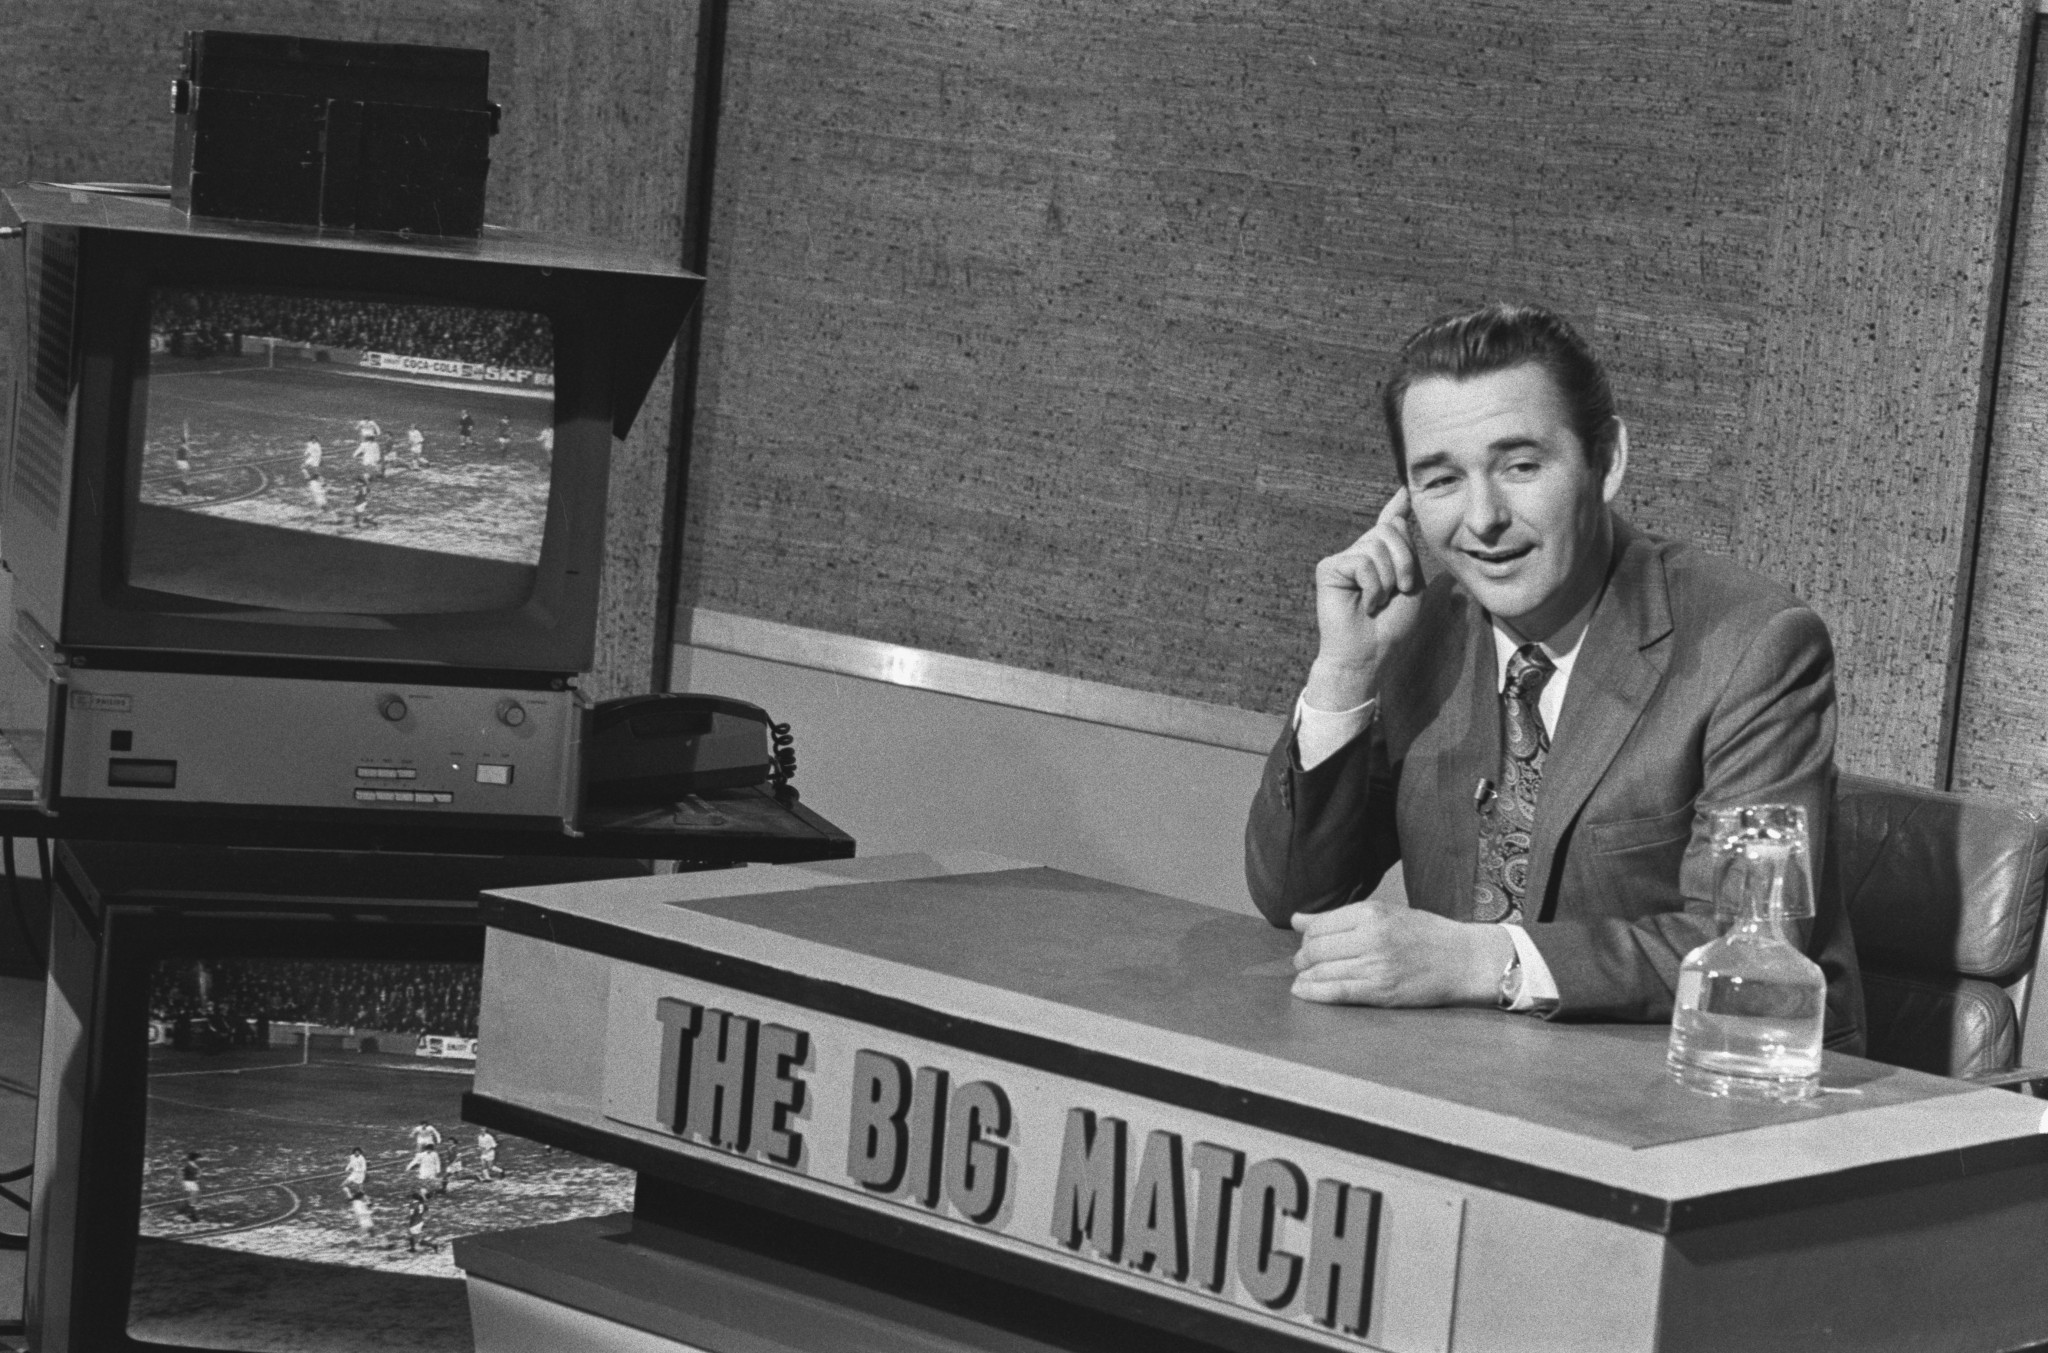 Brian Clough was an outspoken television pundit on football in 1973 ©Getty Images